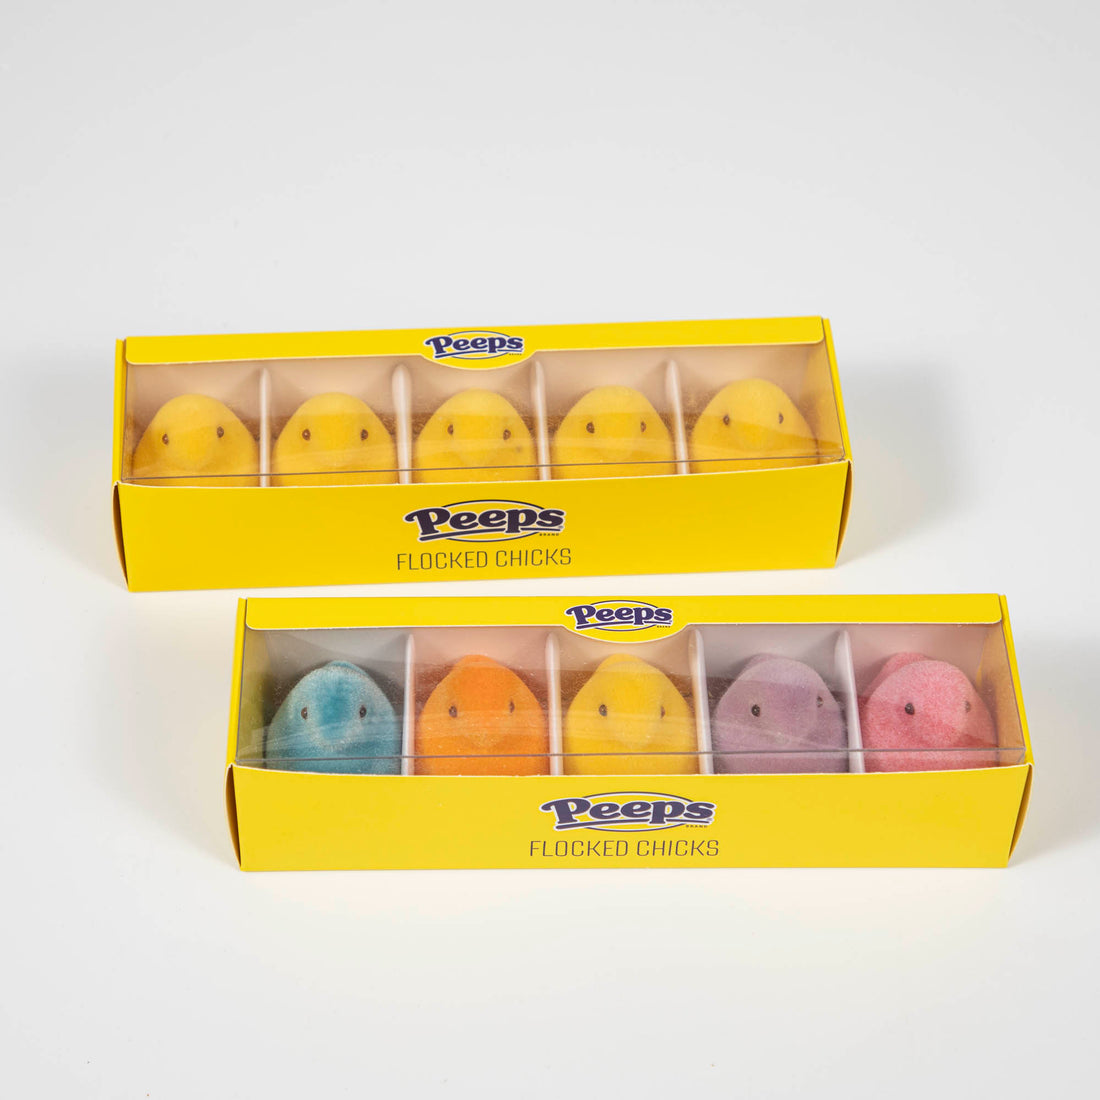 A boxed set of Glitterville Small Flocked PEEPS® Boxed Set of 5, which includes four different colored marshmallow candies shaped like eggs.